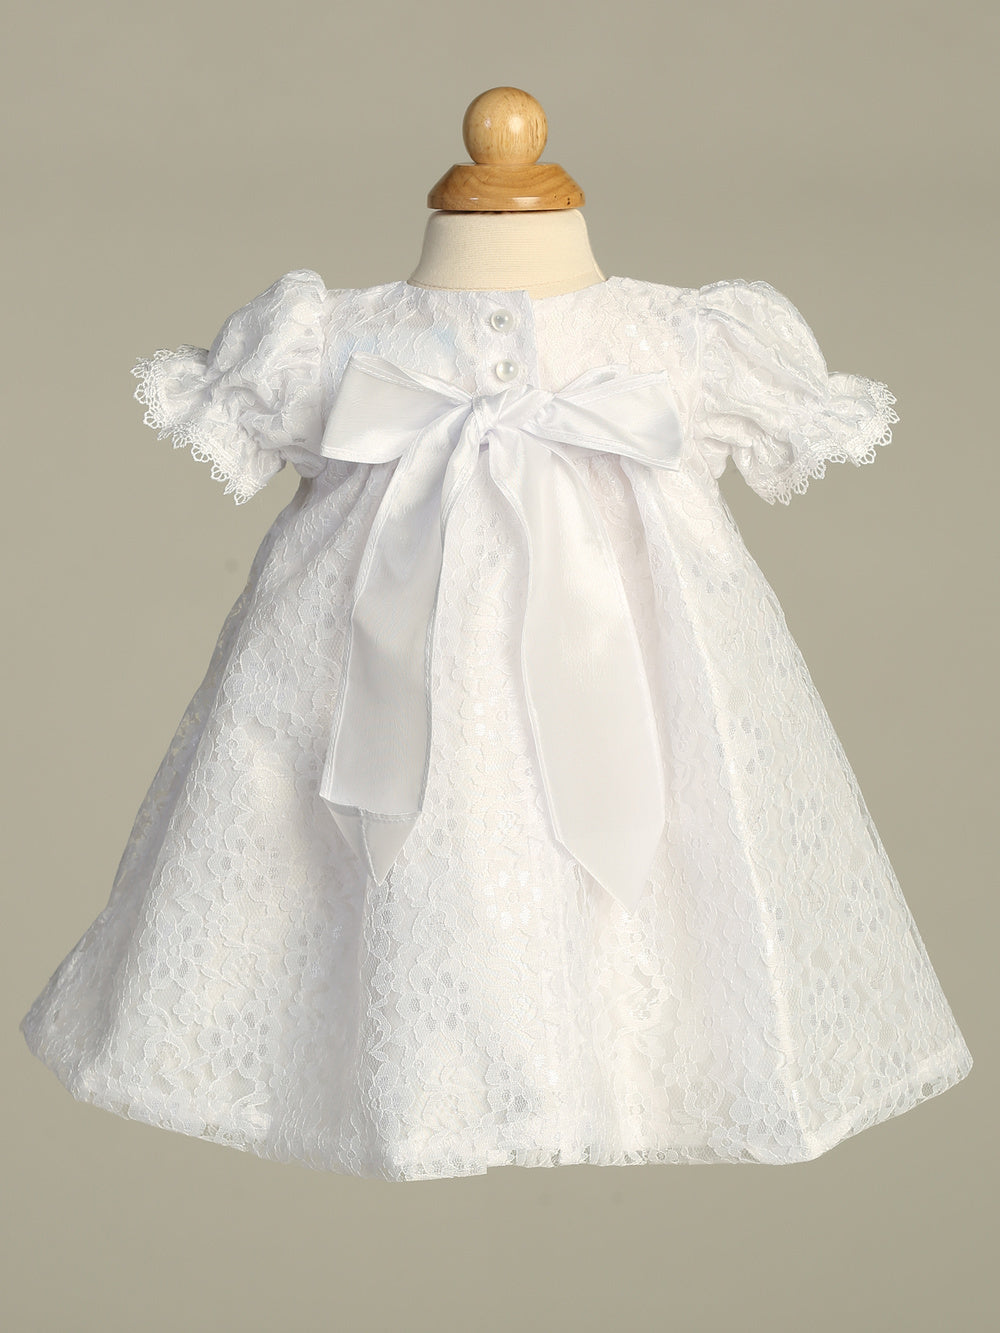 New Arrival Noble Baby Girls Christening Dress White Baptism Gown Lace –  Avadress